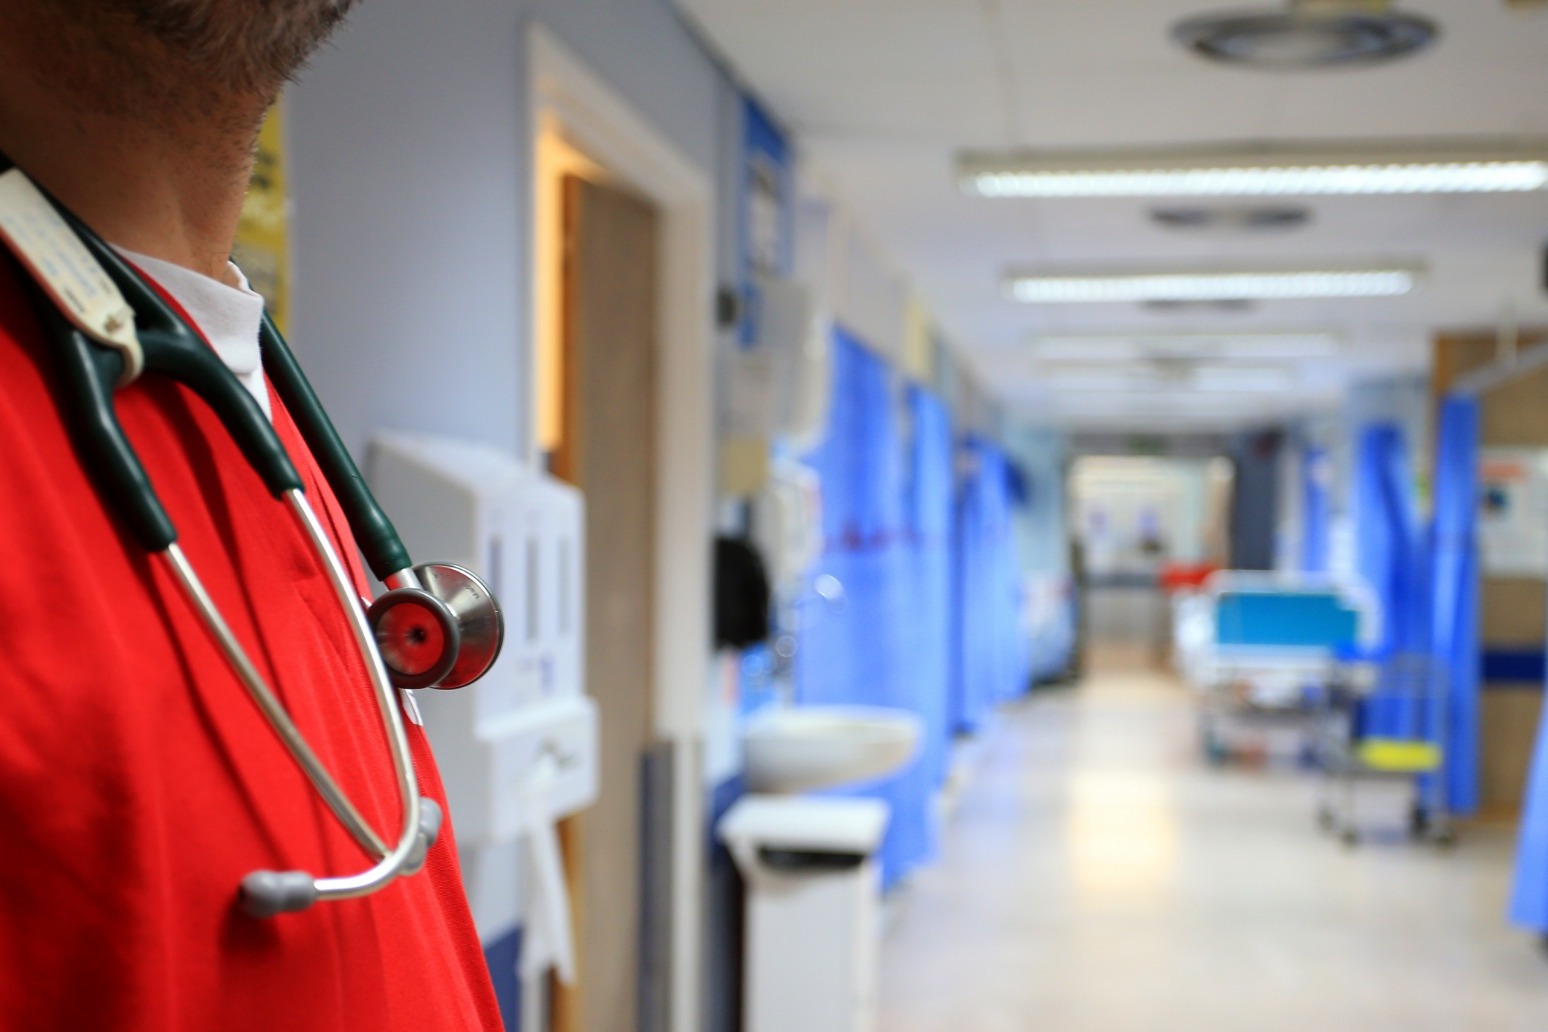 NHS understaffing poses serious risk to patient safety